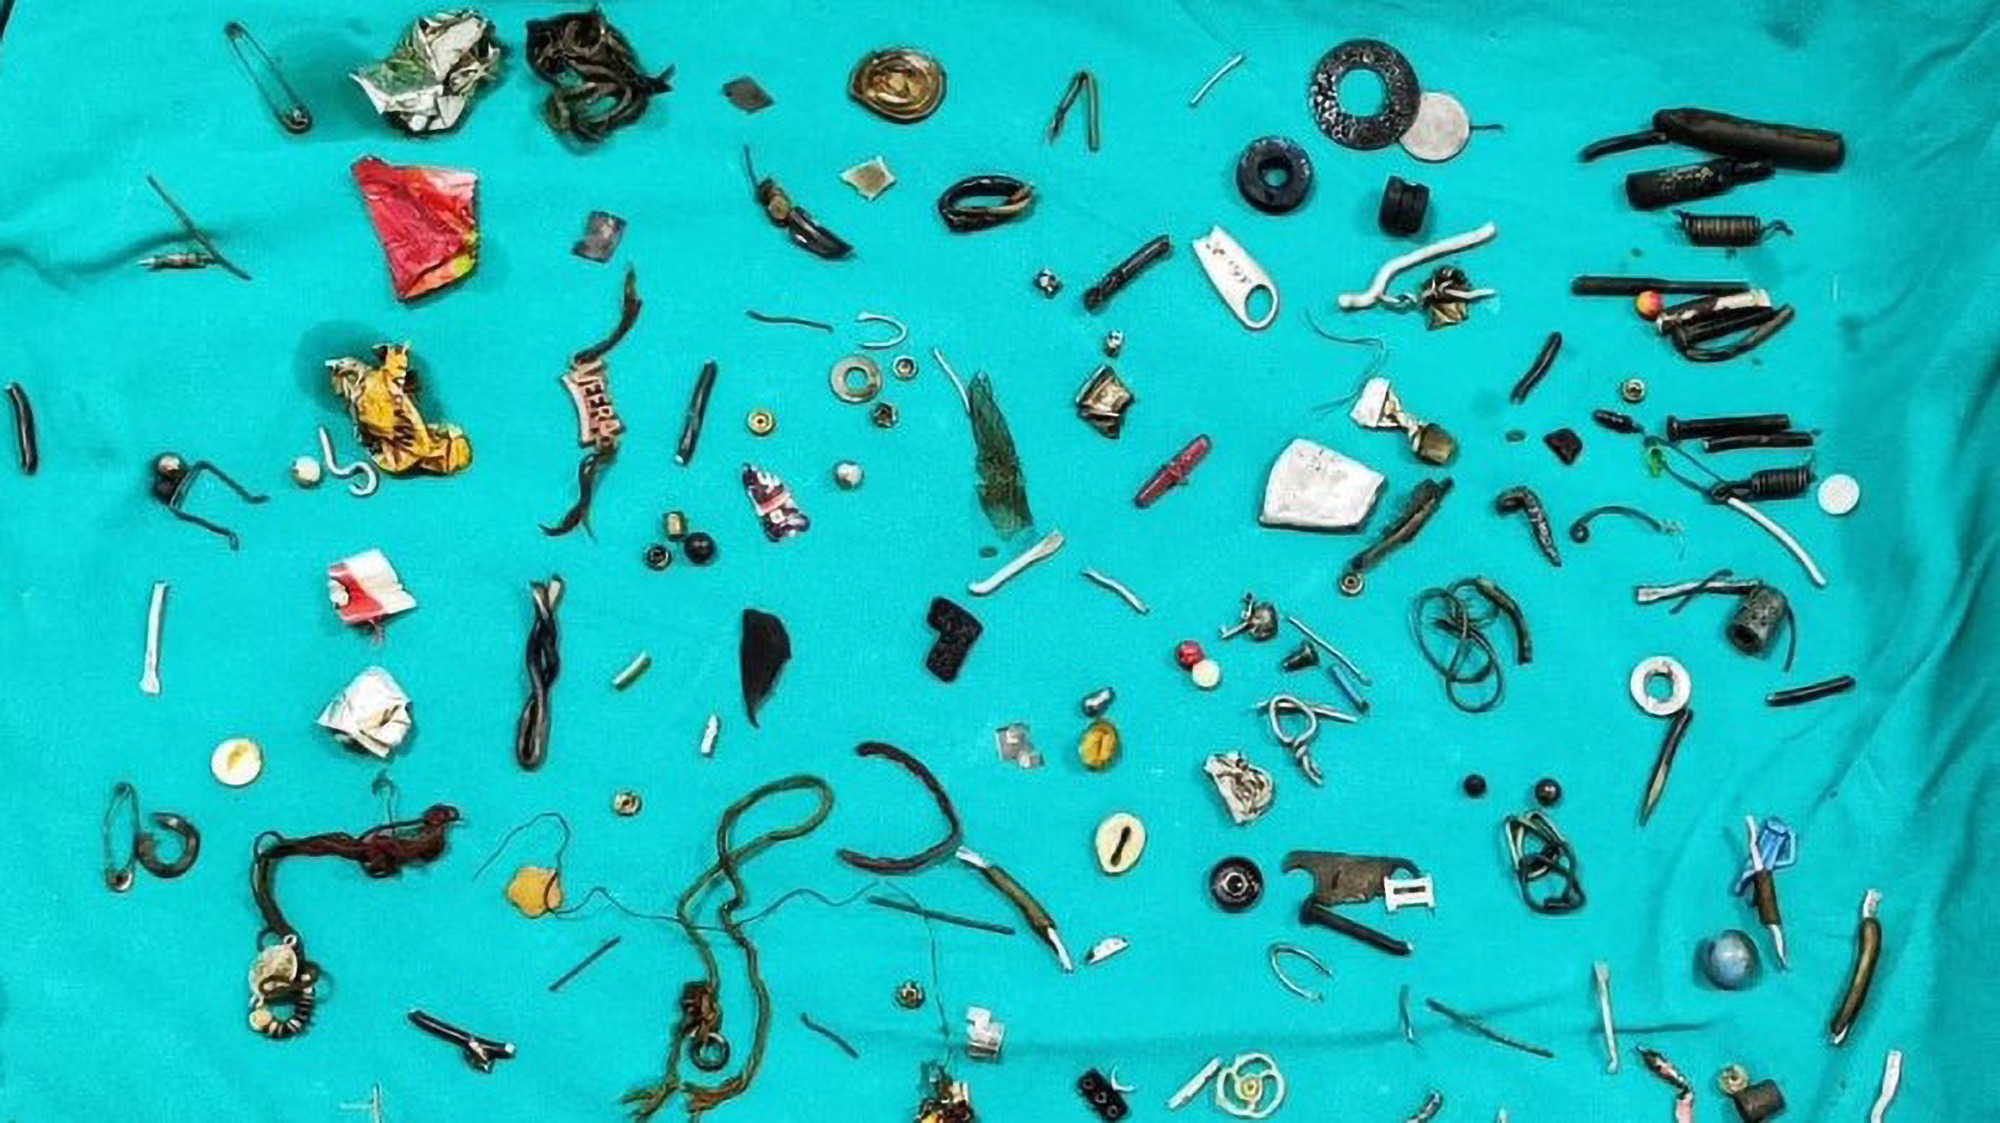  Docs Find Dozens Of Nuts, Bolts, Jewellery And Ear Buds In Man’s Stomach